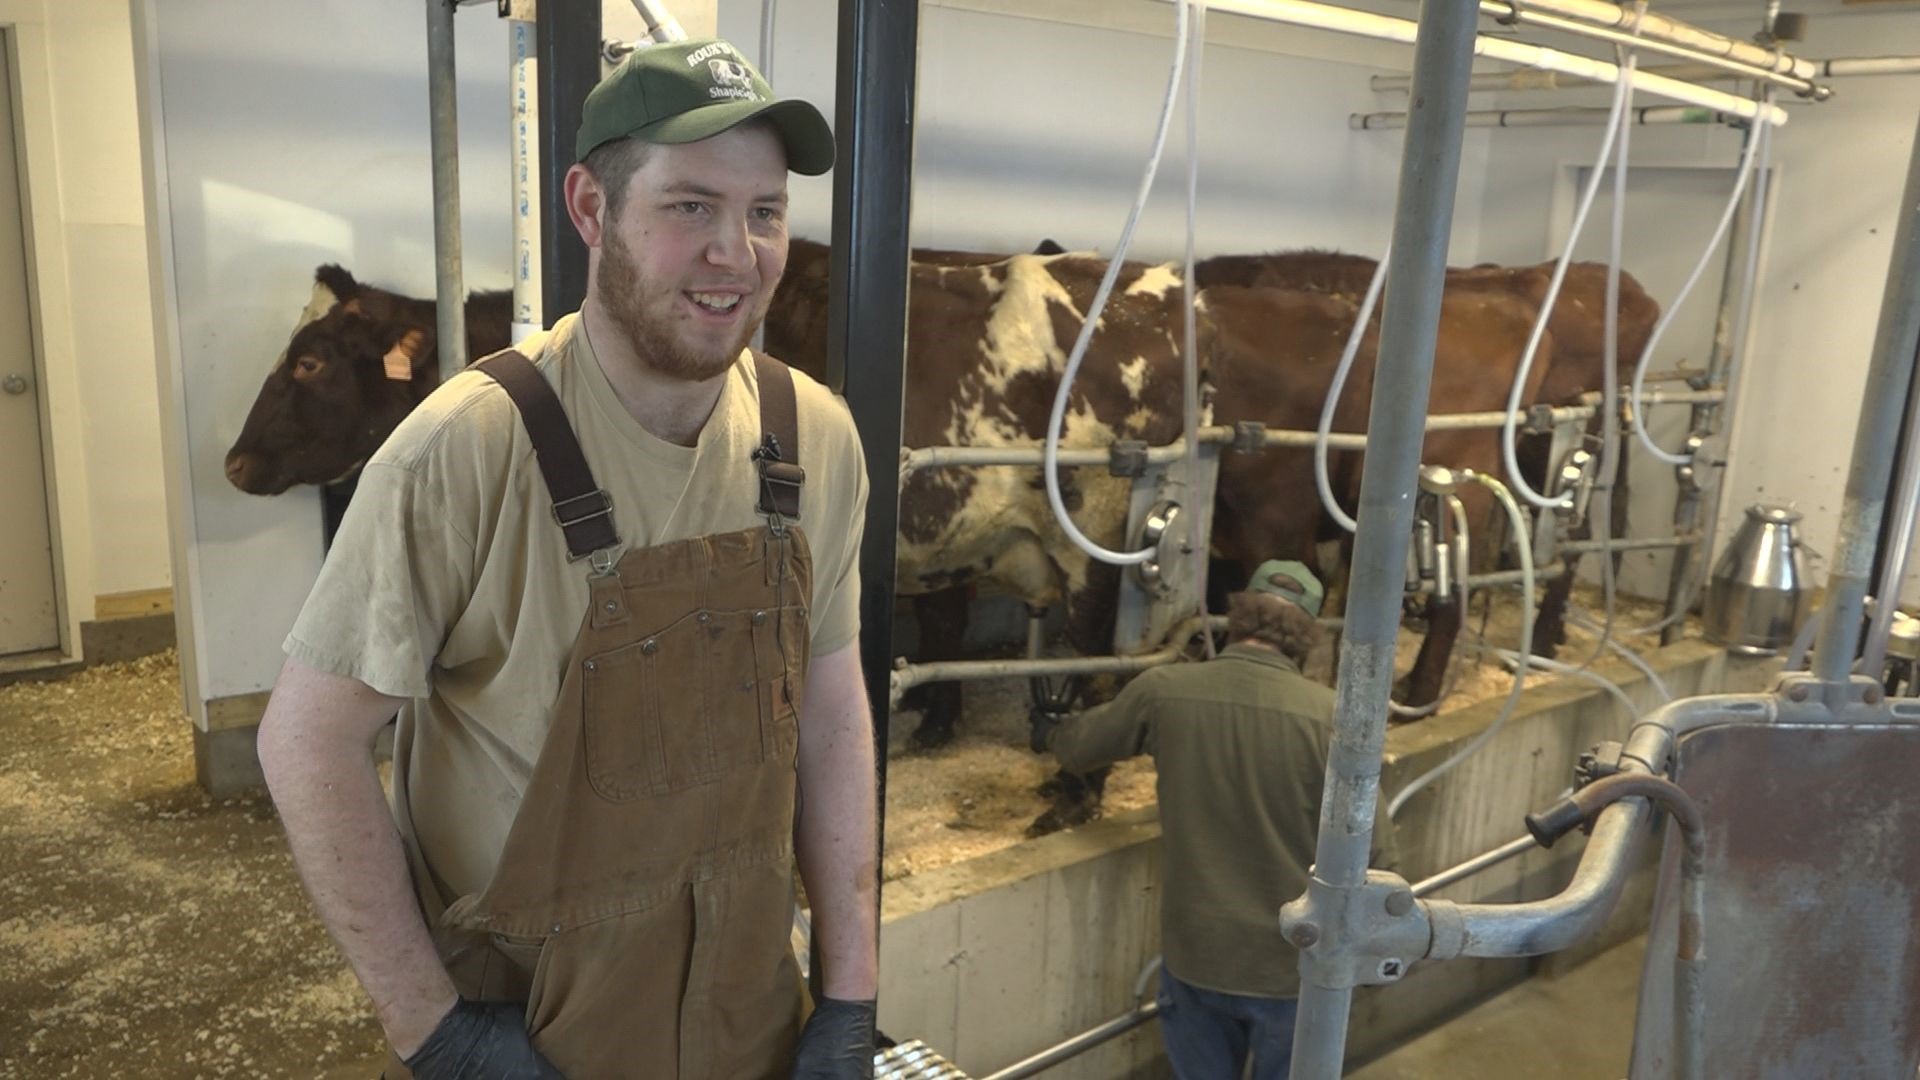 #startMEup: Young farmer 'milks' opportunity, takes risk ...